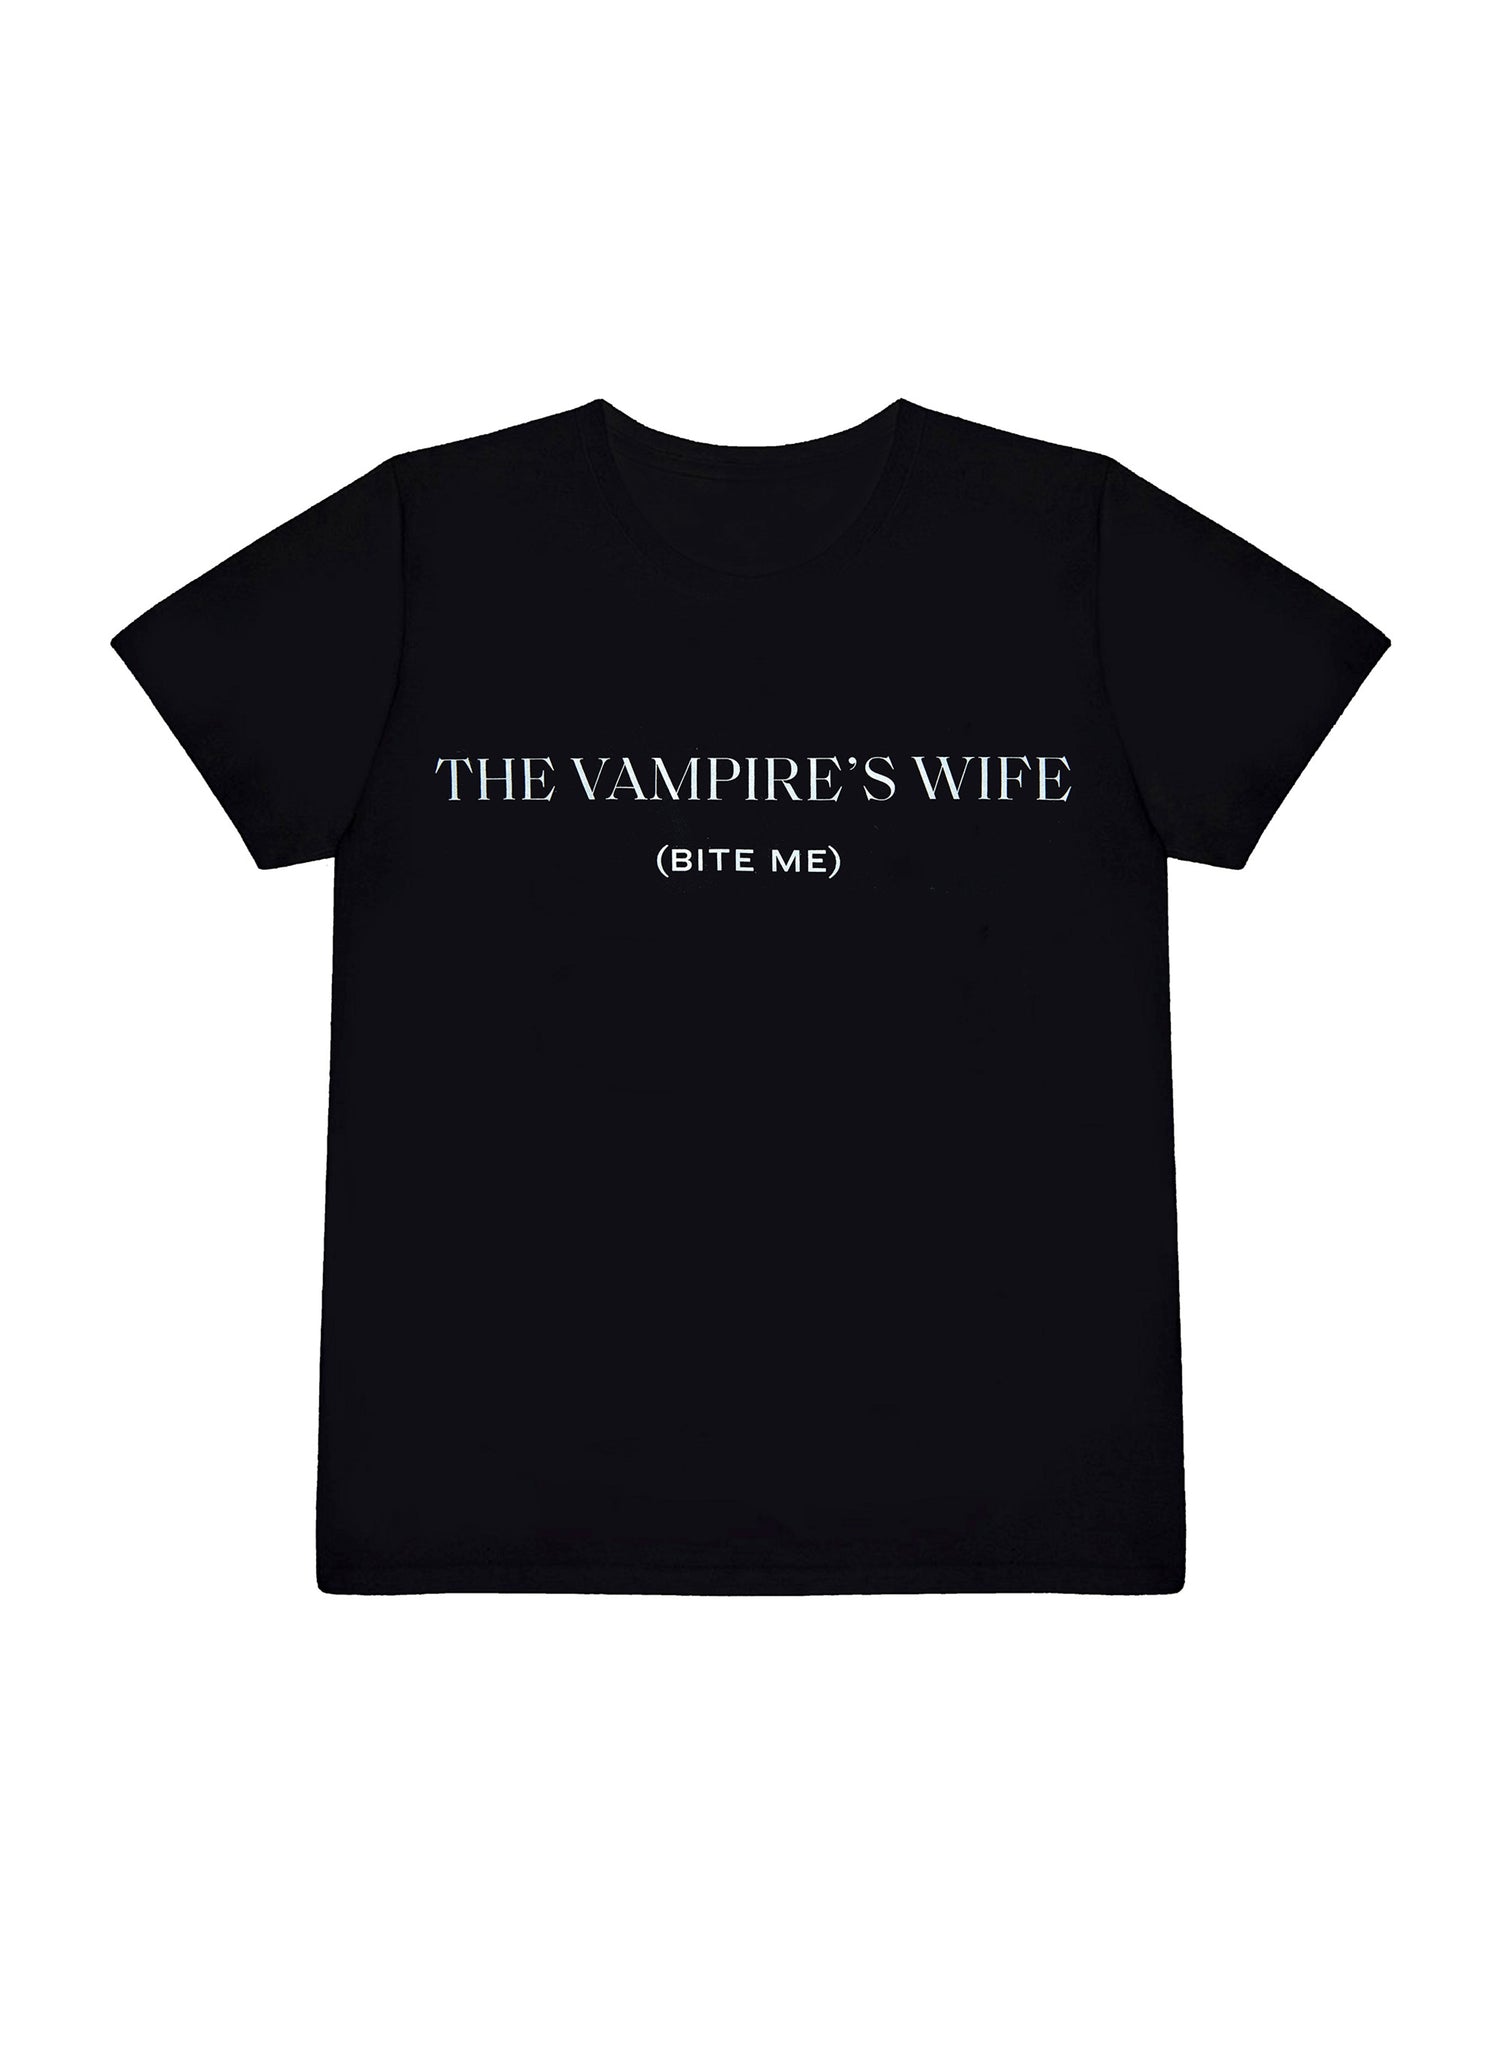 NICK CAVE AND THE BAD SEEDS X THE VAMPIRE'S WIFE 'BITE ME' T SHIRT